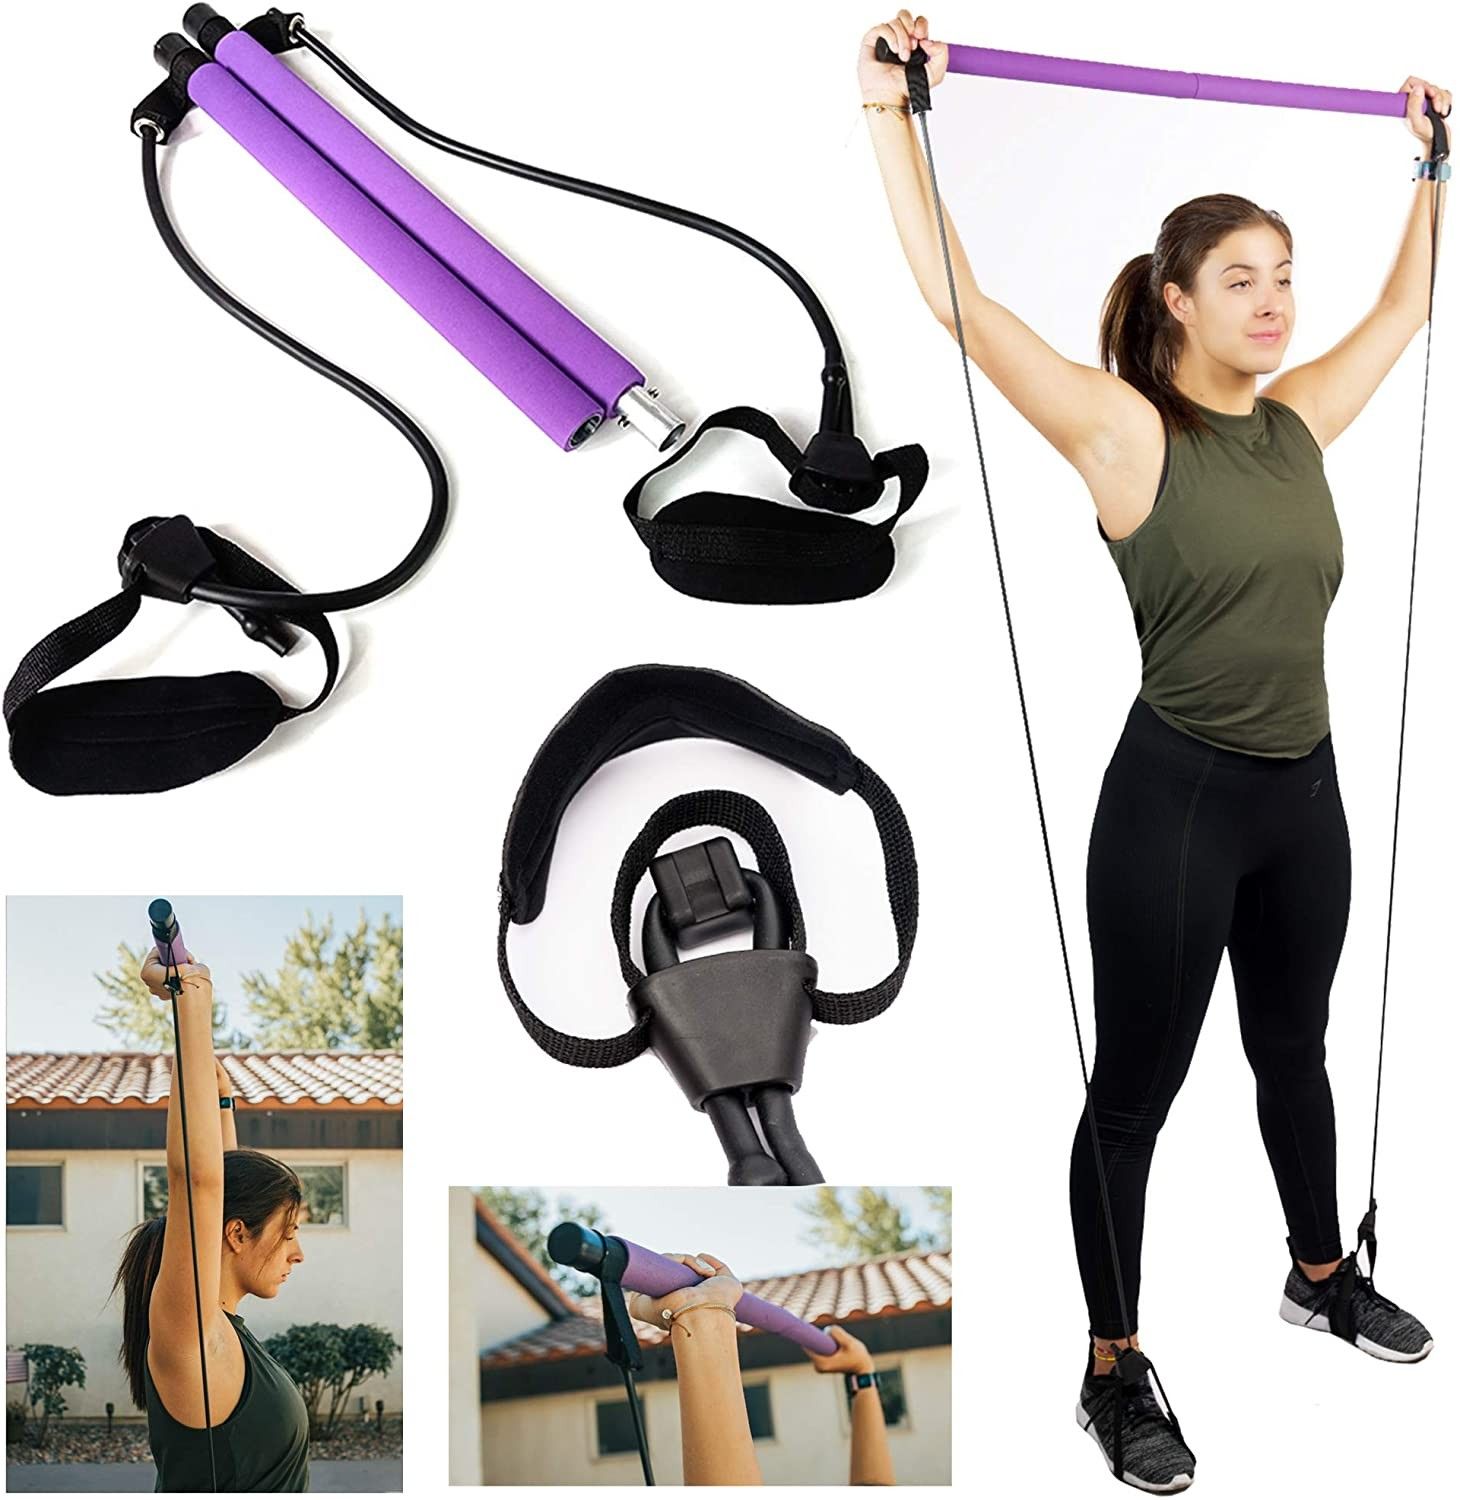 VICTORIAGRACES Pilates Bar Kit With Adjustable Resistance Bands Portable Home Gym Equipment x3 Full Body Workout Exercise Band